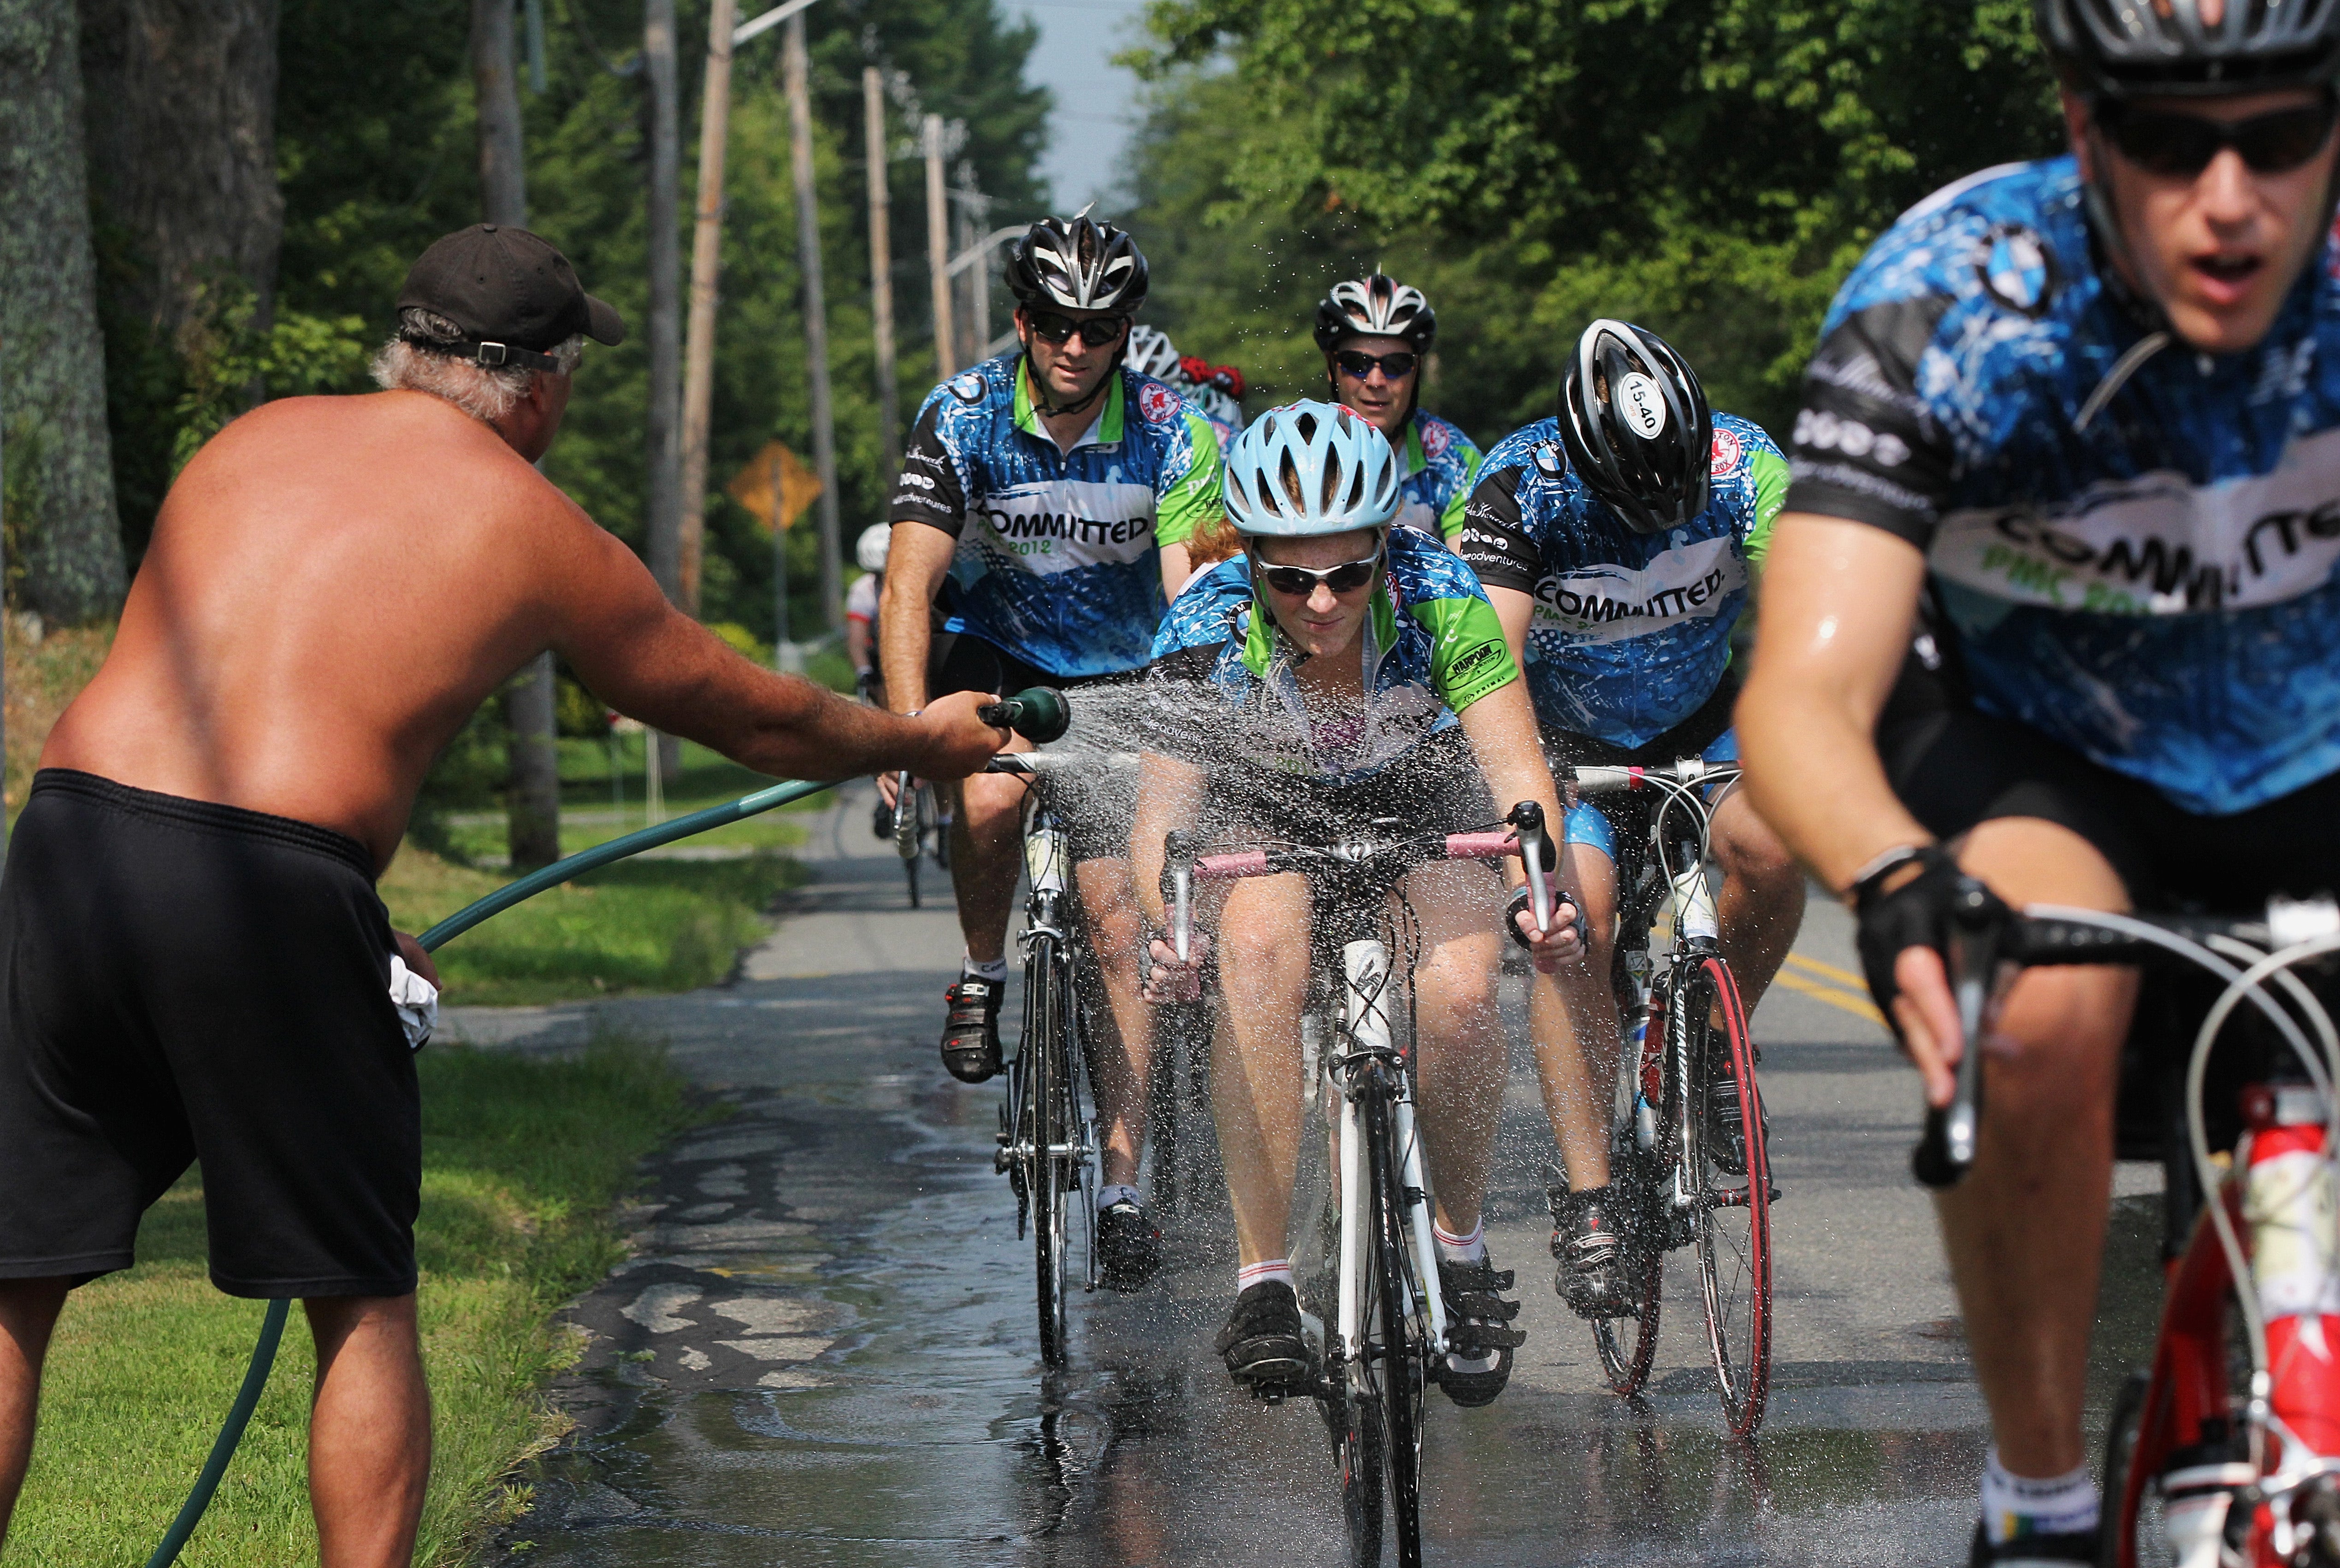 Cancer fight intensifies as Pan-Mass Challenge charity ride nears $1B